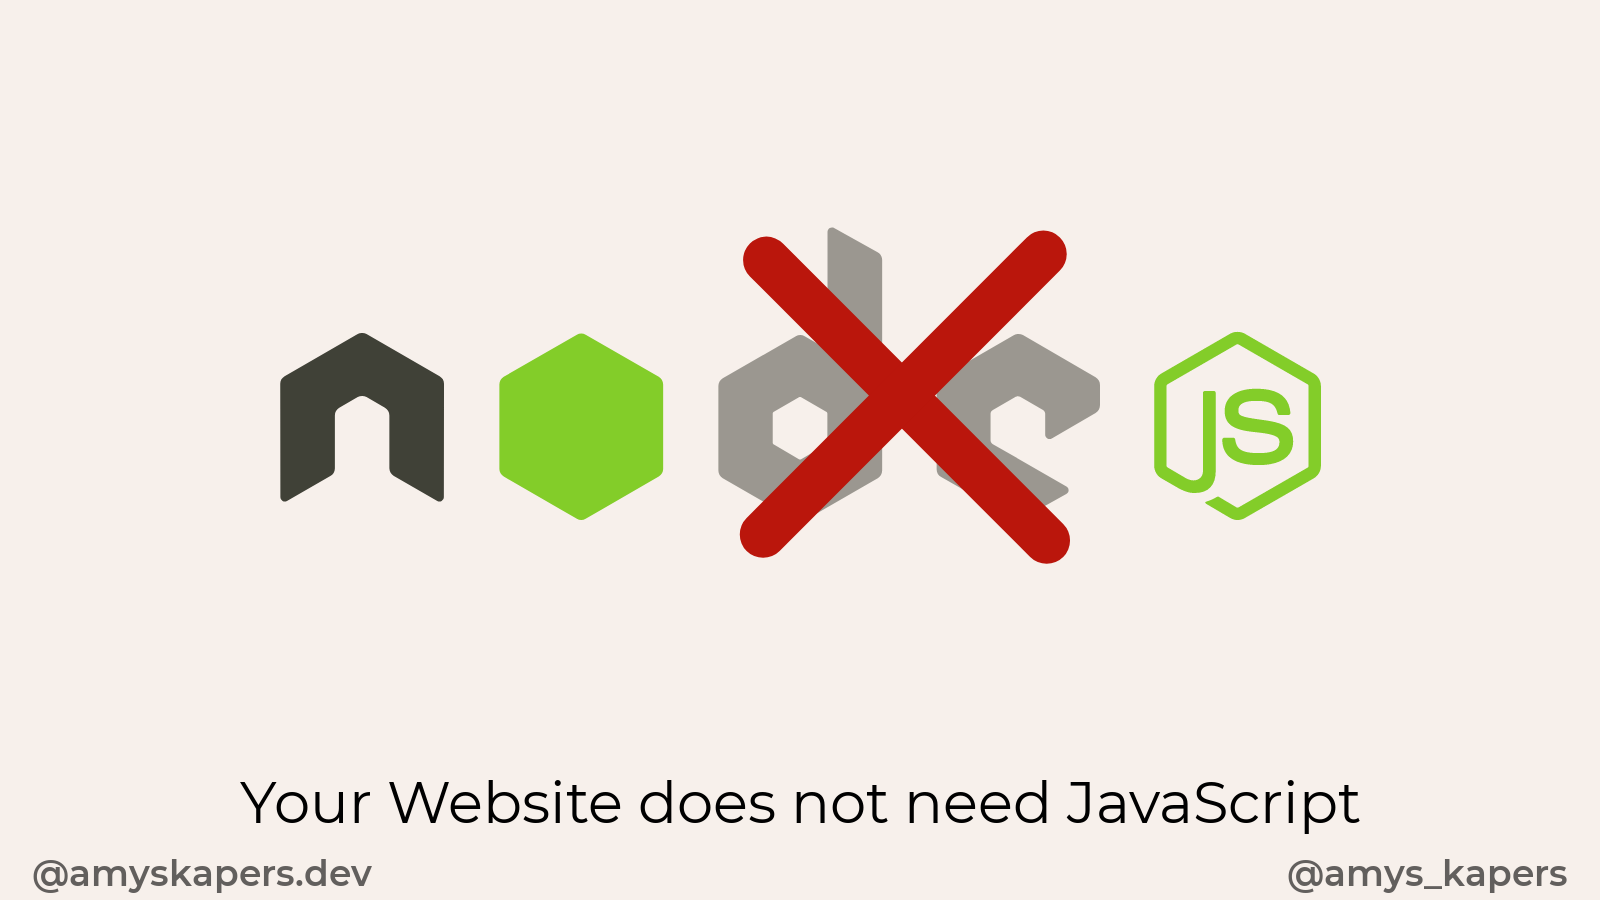 Your website does not need JavaScript